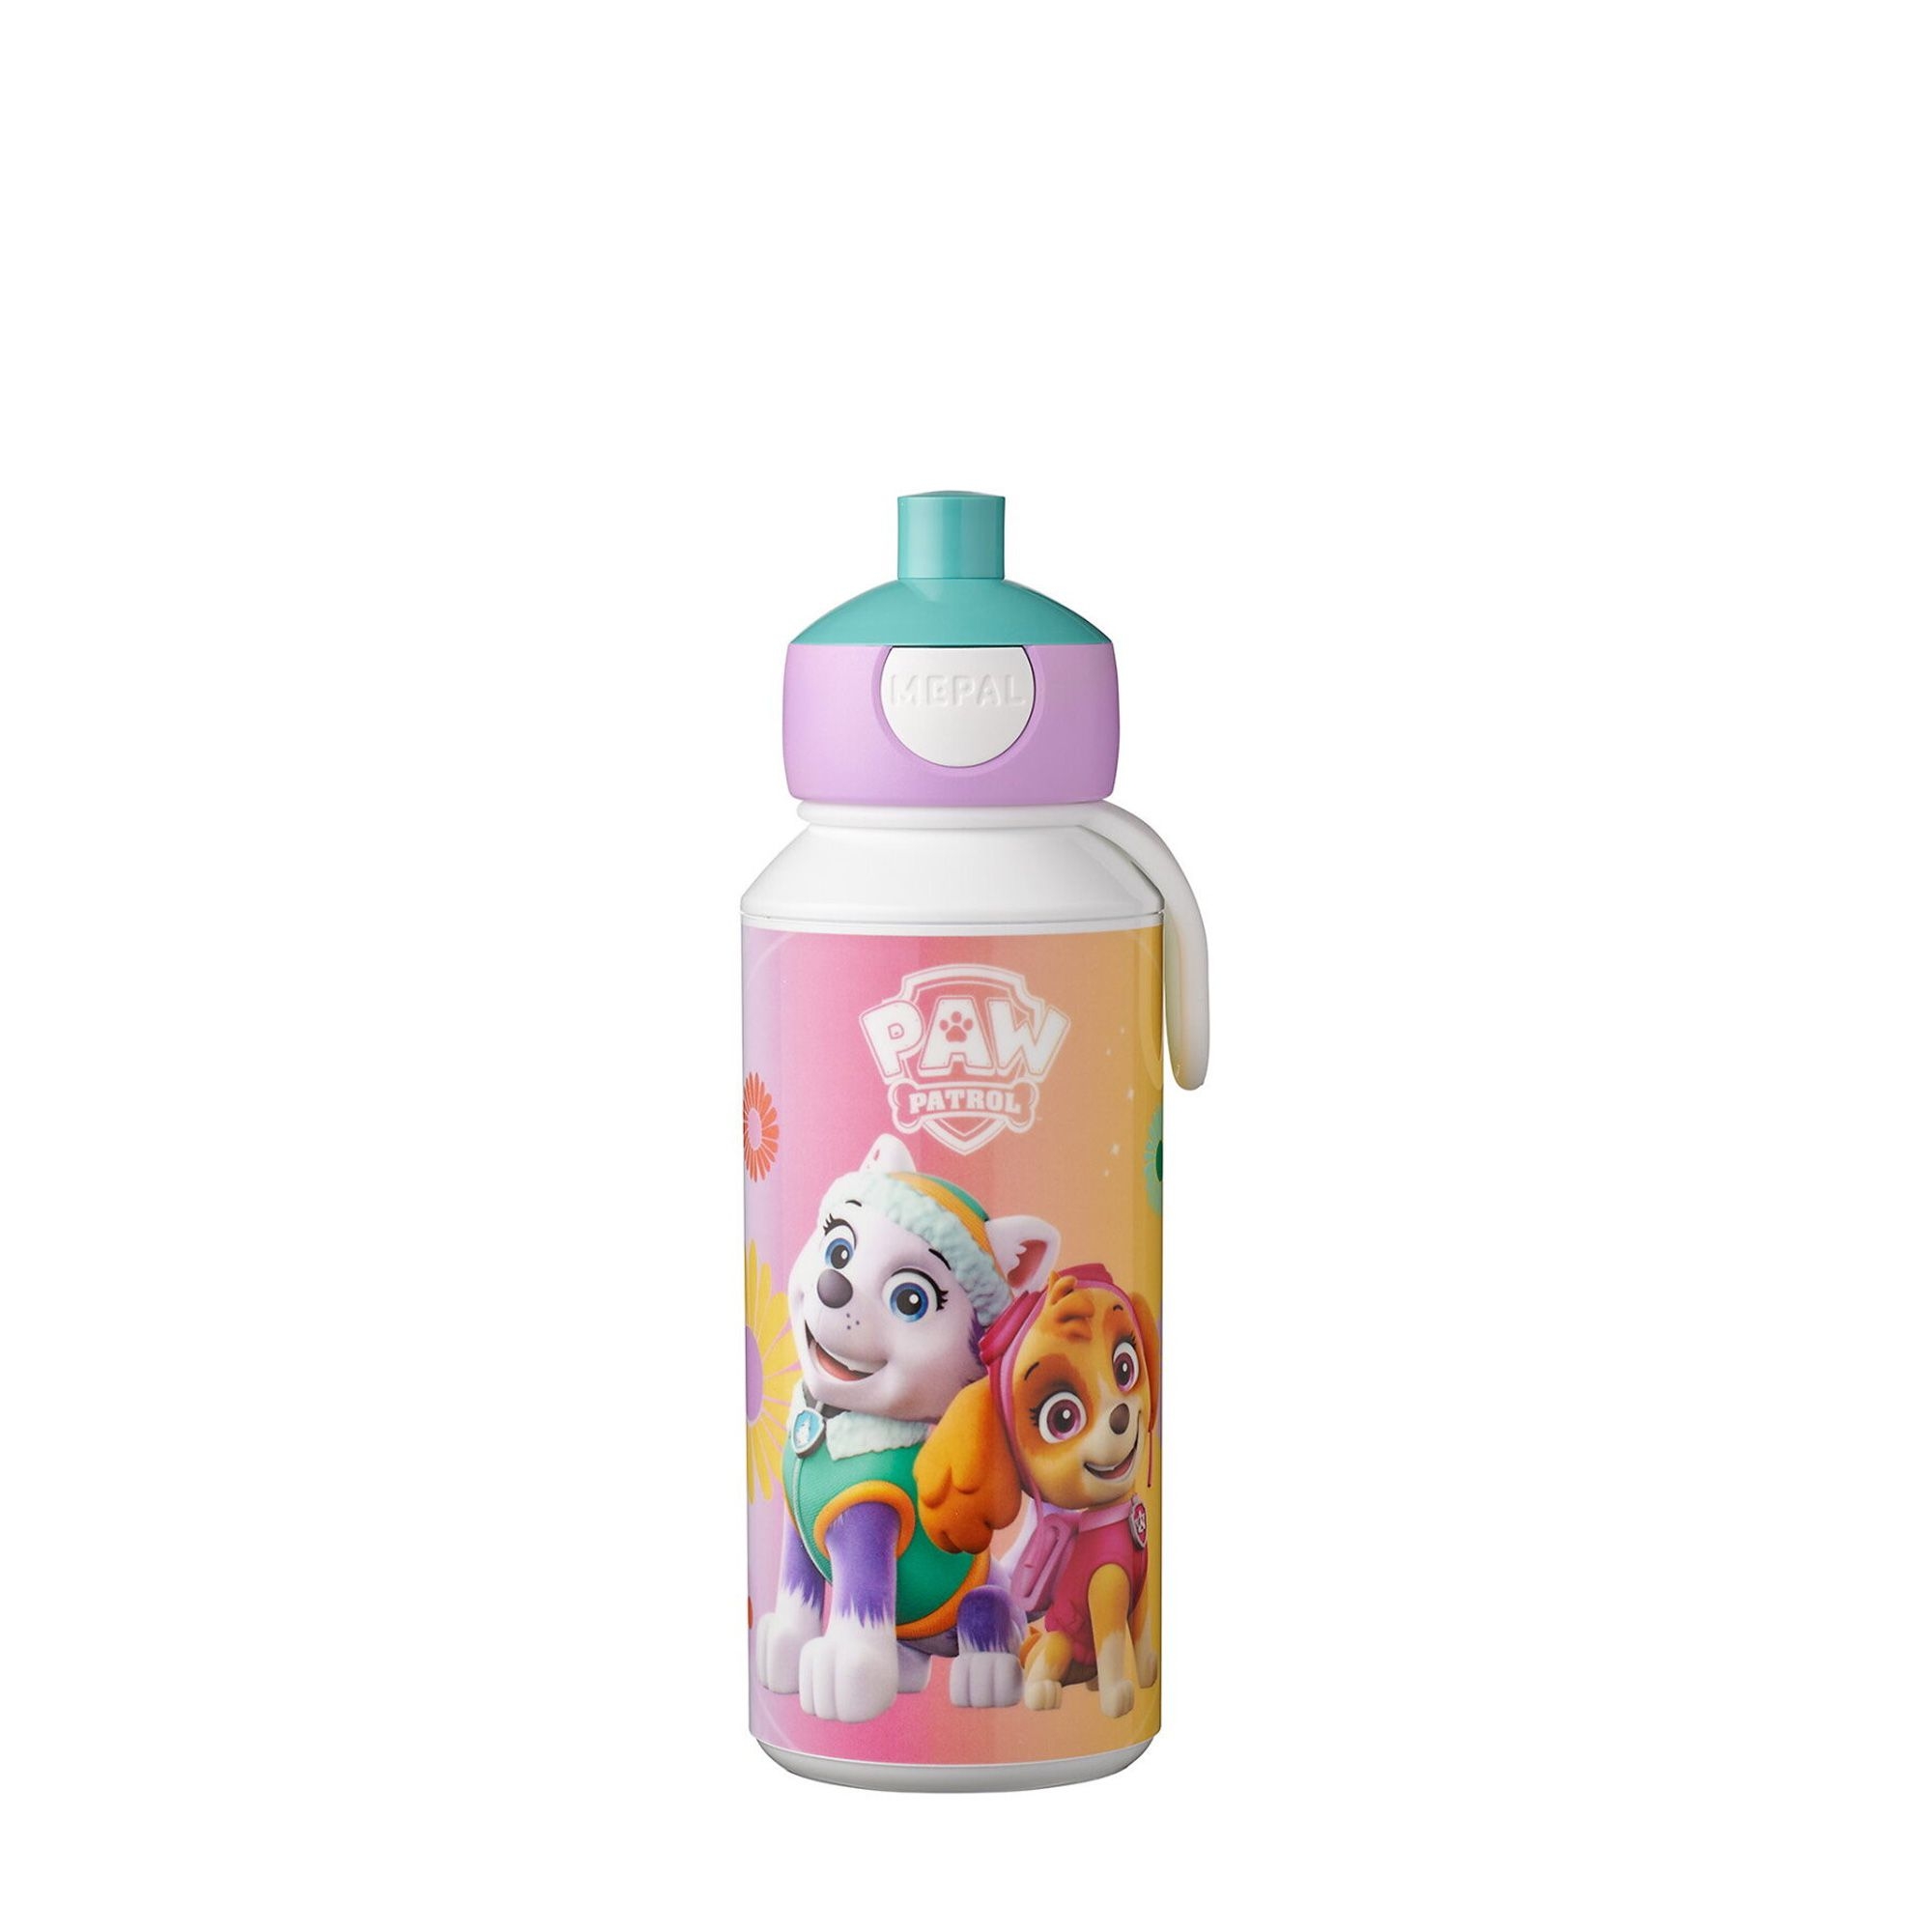 Mepal - Campus N Paw Patrol Girls - different products